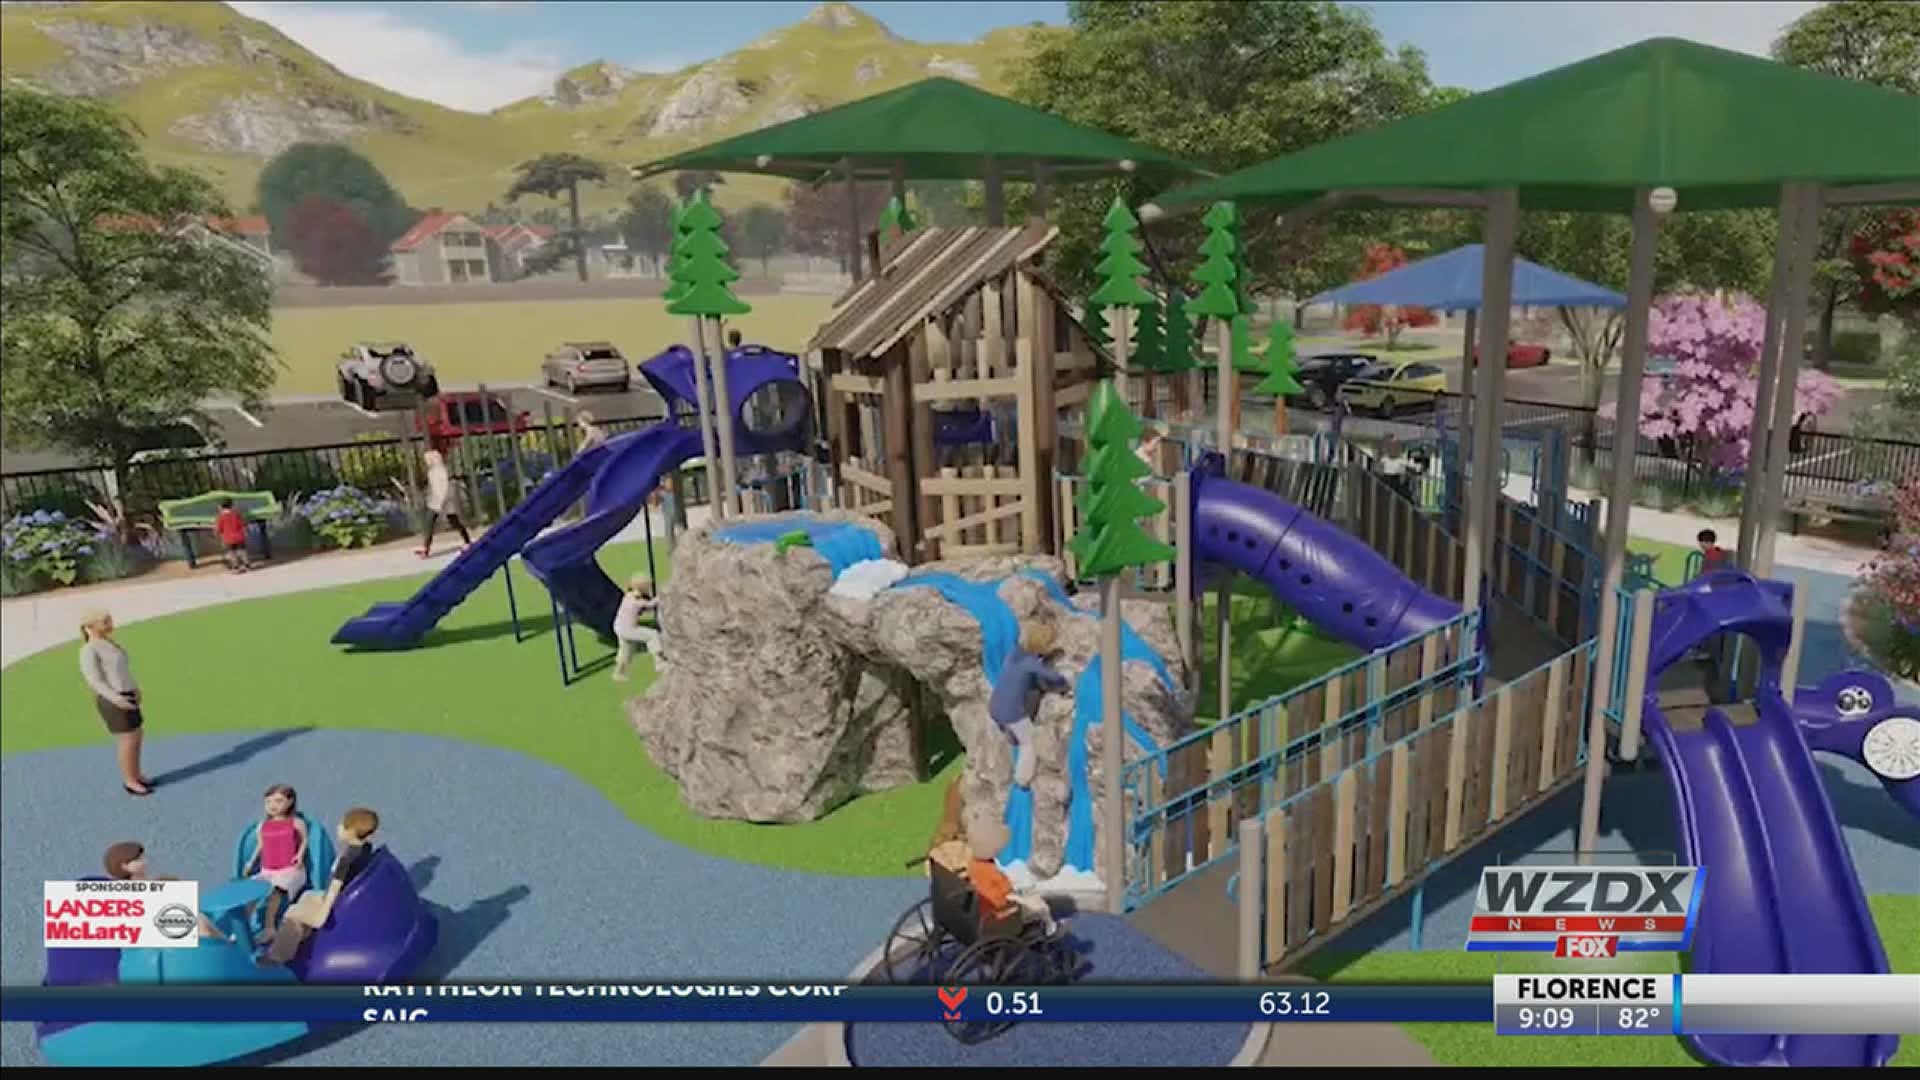 A new playground hopes to be the first of its kind in North Alabama, one that’s safe for children of all abilities. But, the pandemic has affected things.